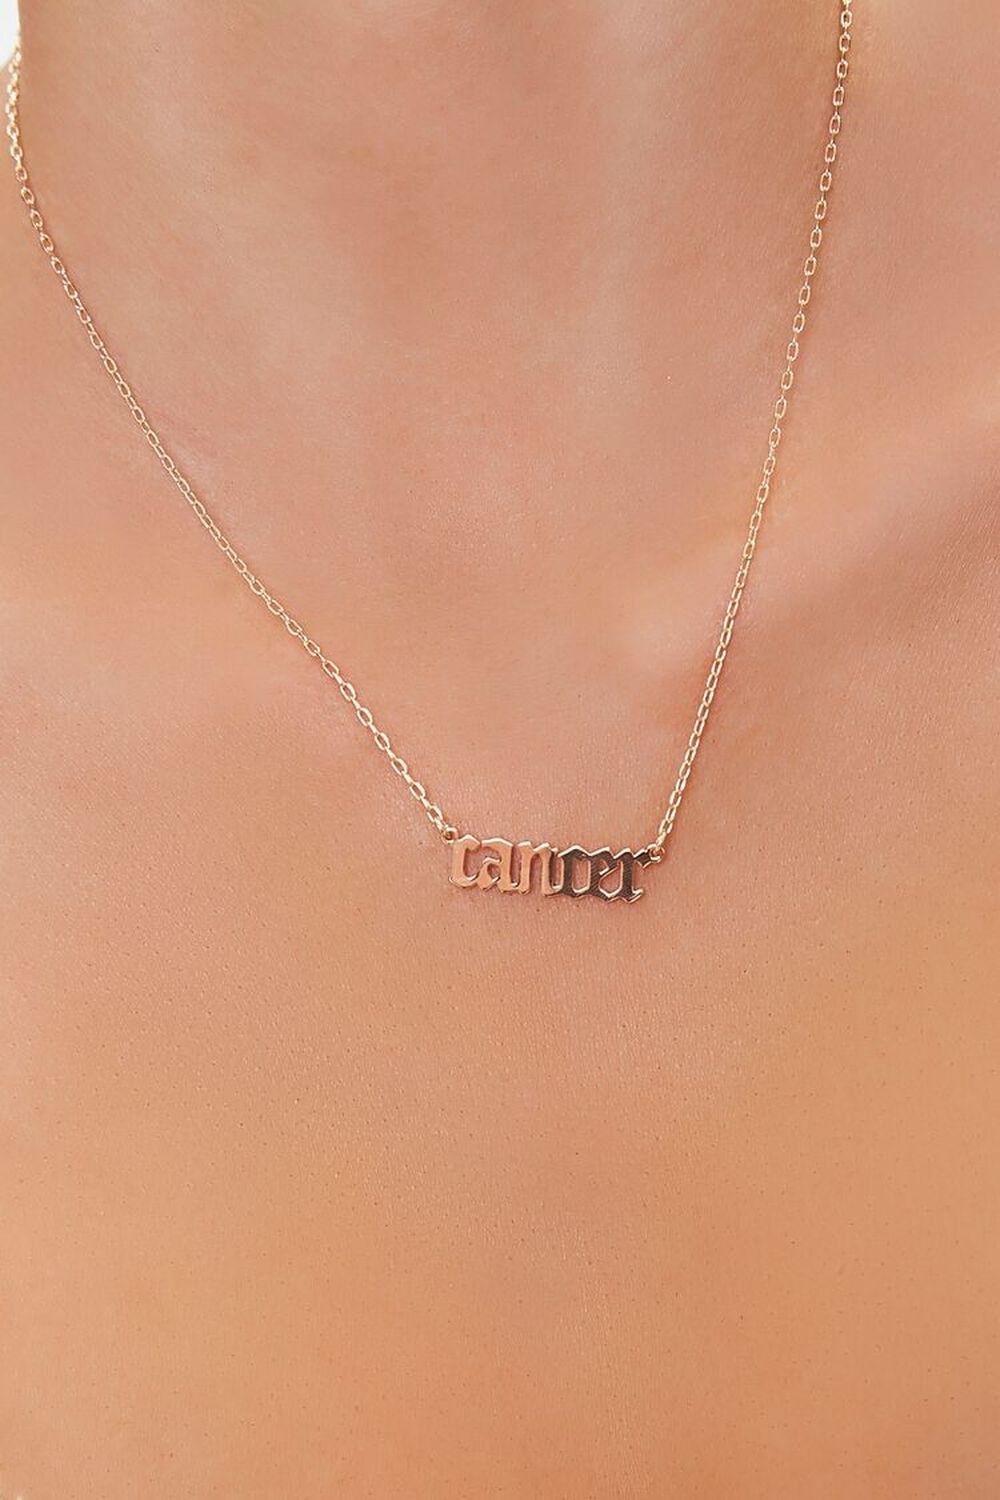 Model wearing necklace that says &quot;cancer&quot;